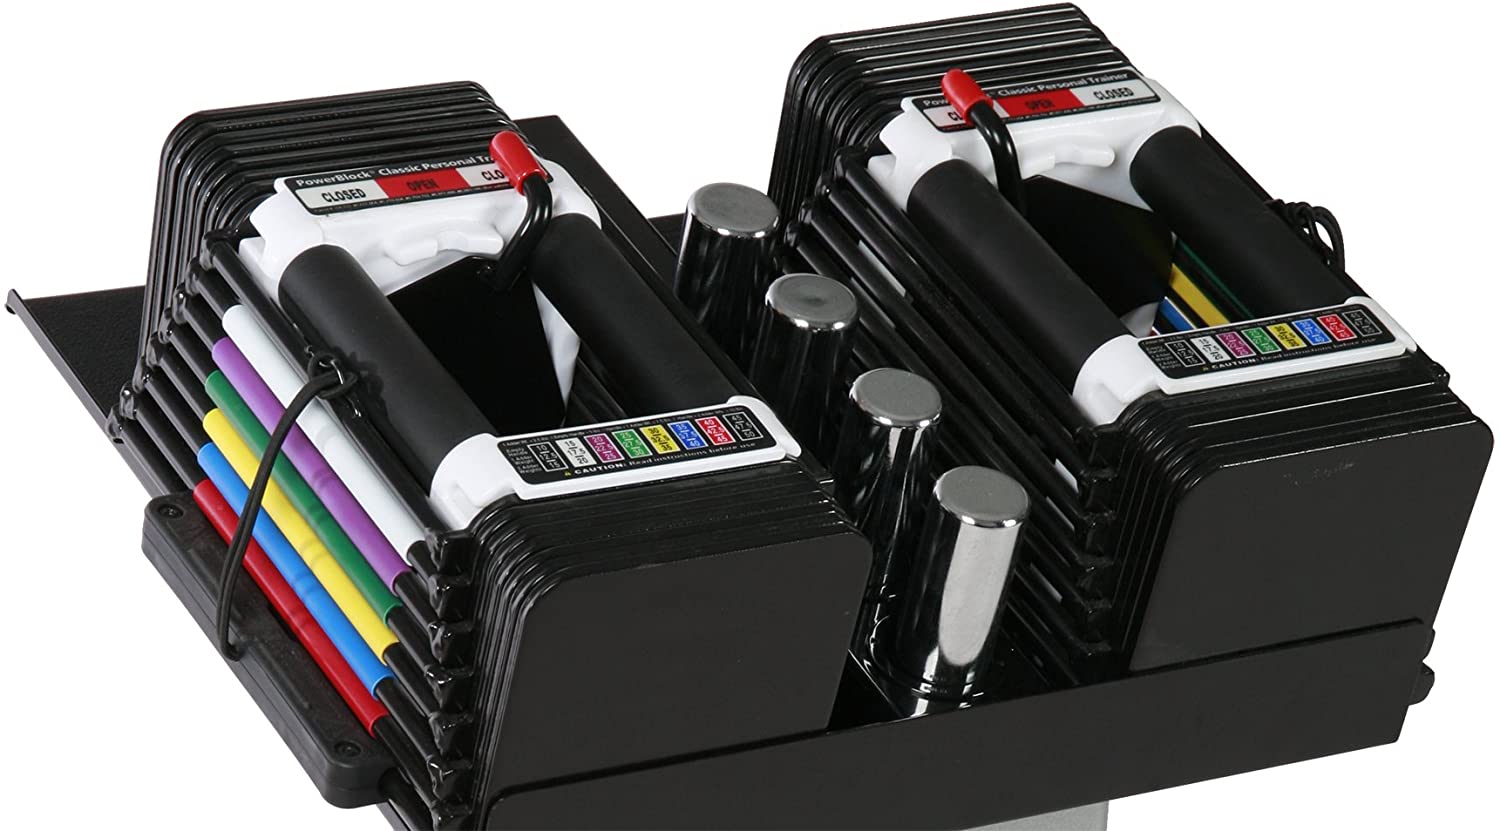 powerblock adjustable dumbbell set 5 to 50 pounds  for 333 plus taxs and free shipping